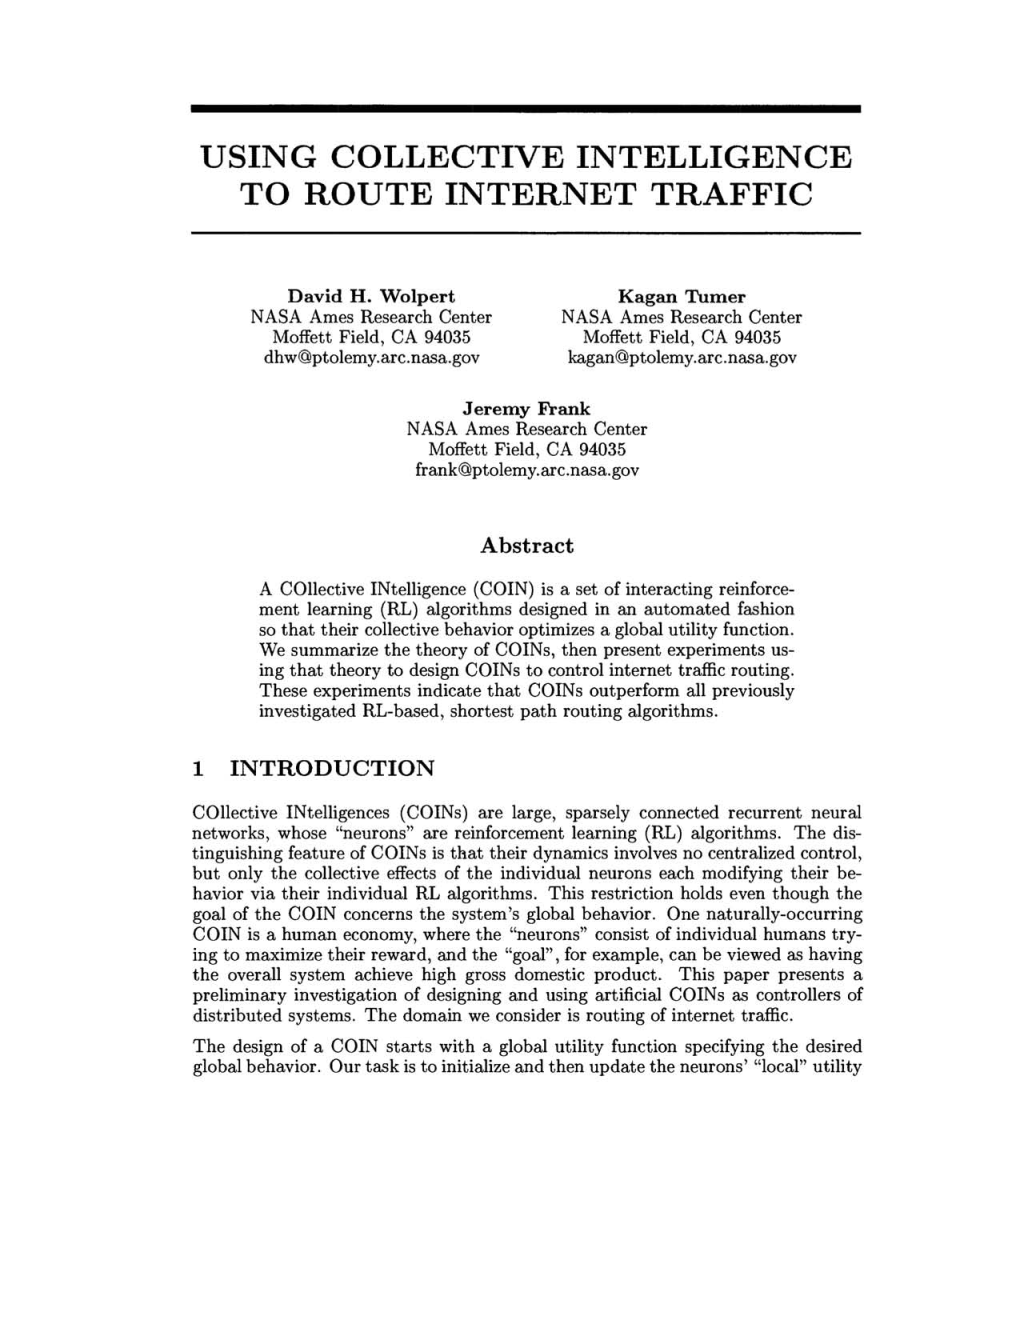 Using Collective Intelligence to Route Internet Traffic